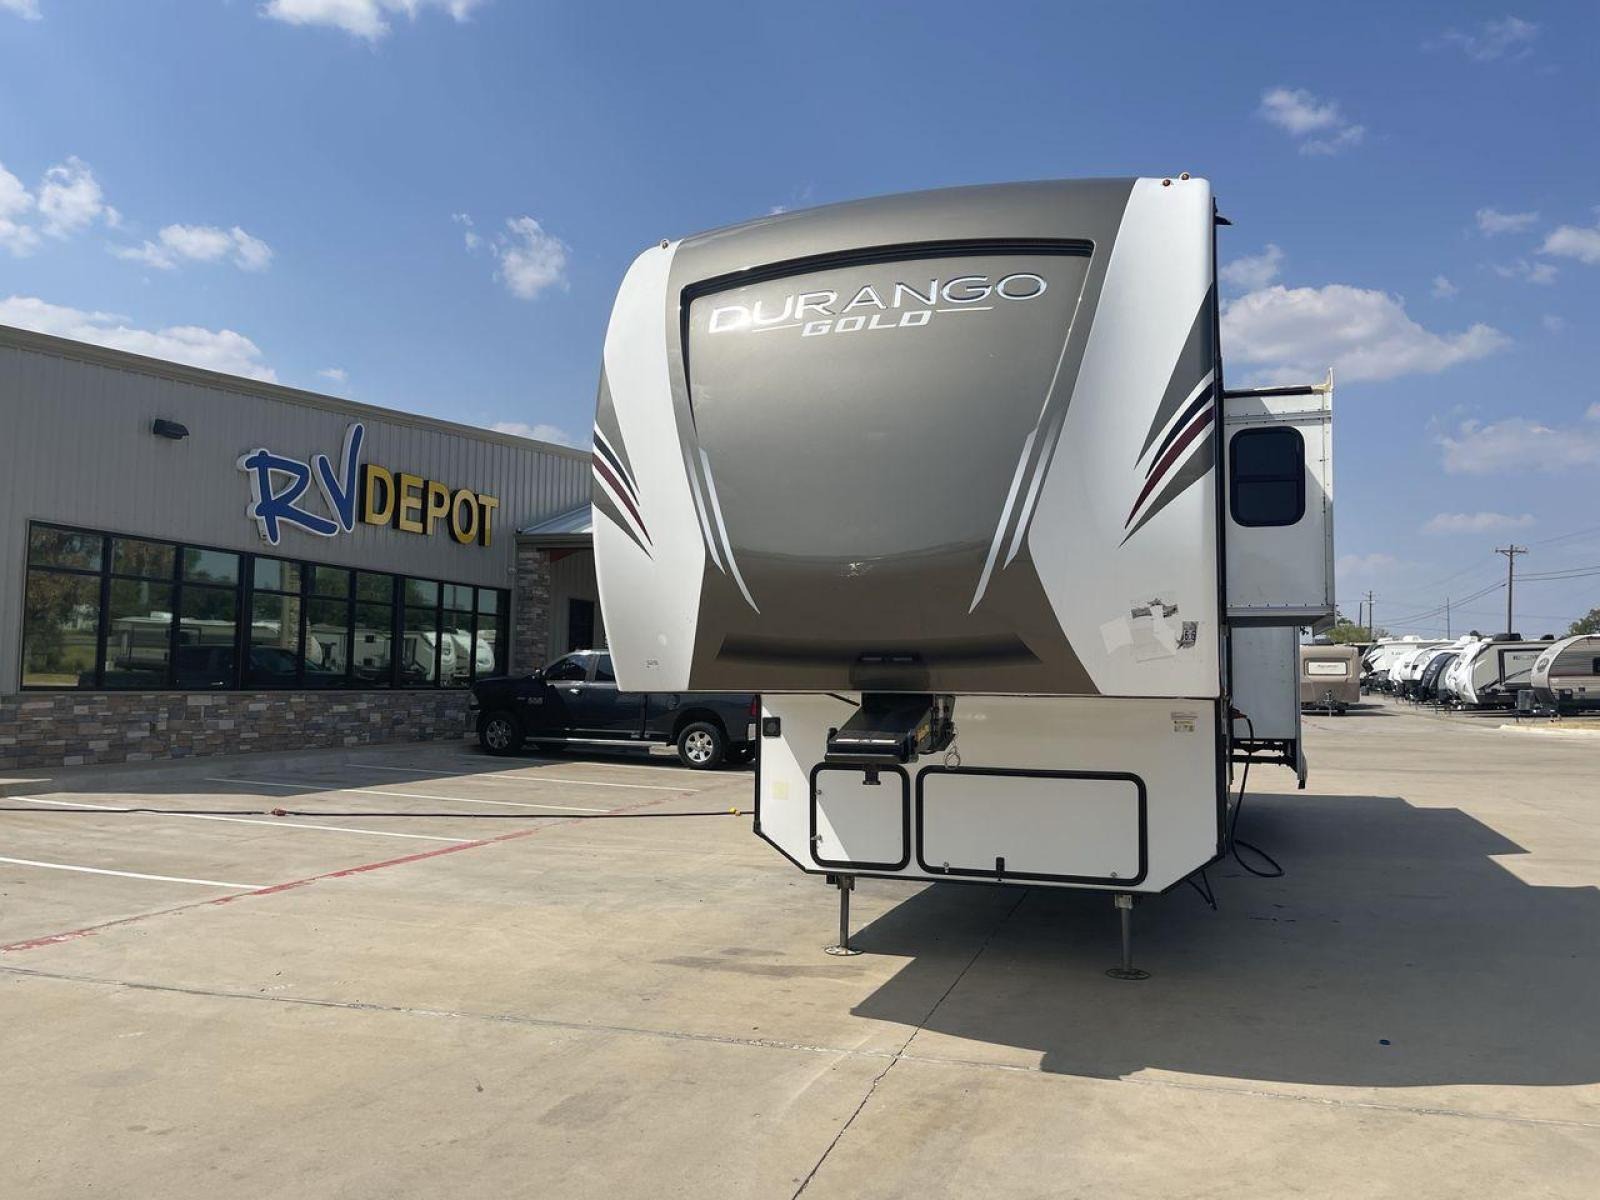 2020 K-Z DURANGO GOLD 366FBT (4EZFV4026L6) , Length: 39.83 ft. | Dry Weight: 11,470 lbs. | Gross Weight: 14,500 lbs. | Slides: 3 transmission, located at 4319 N Main St, Cleburne, TX, 76033, (817) 678-5133, 32.385960, -97.391212 - Travel and enjoy the luxuries this 2020 K-Z Durango Gold 366FBT has to offer! This fifth wheel measures almost 40 feet long and 13.5 feet tall. It has a dry weight of 11,470 pounds as well as a GVWR of 14,500 pounds. It comes equipped with three power slides and an 18-foot power awning. This unit is - Photo #0